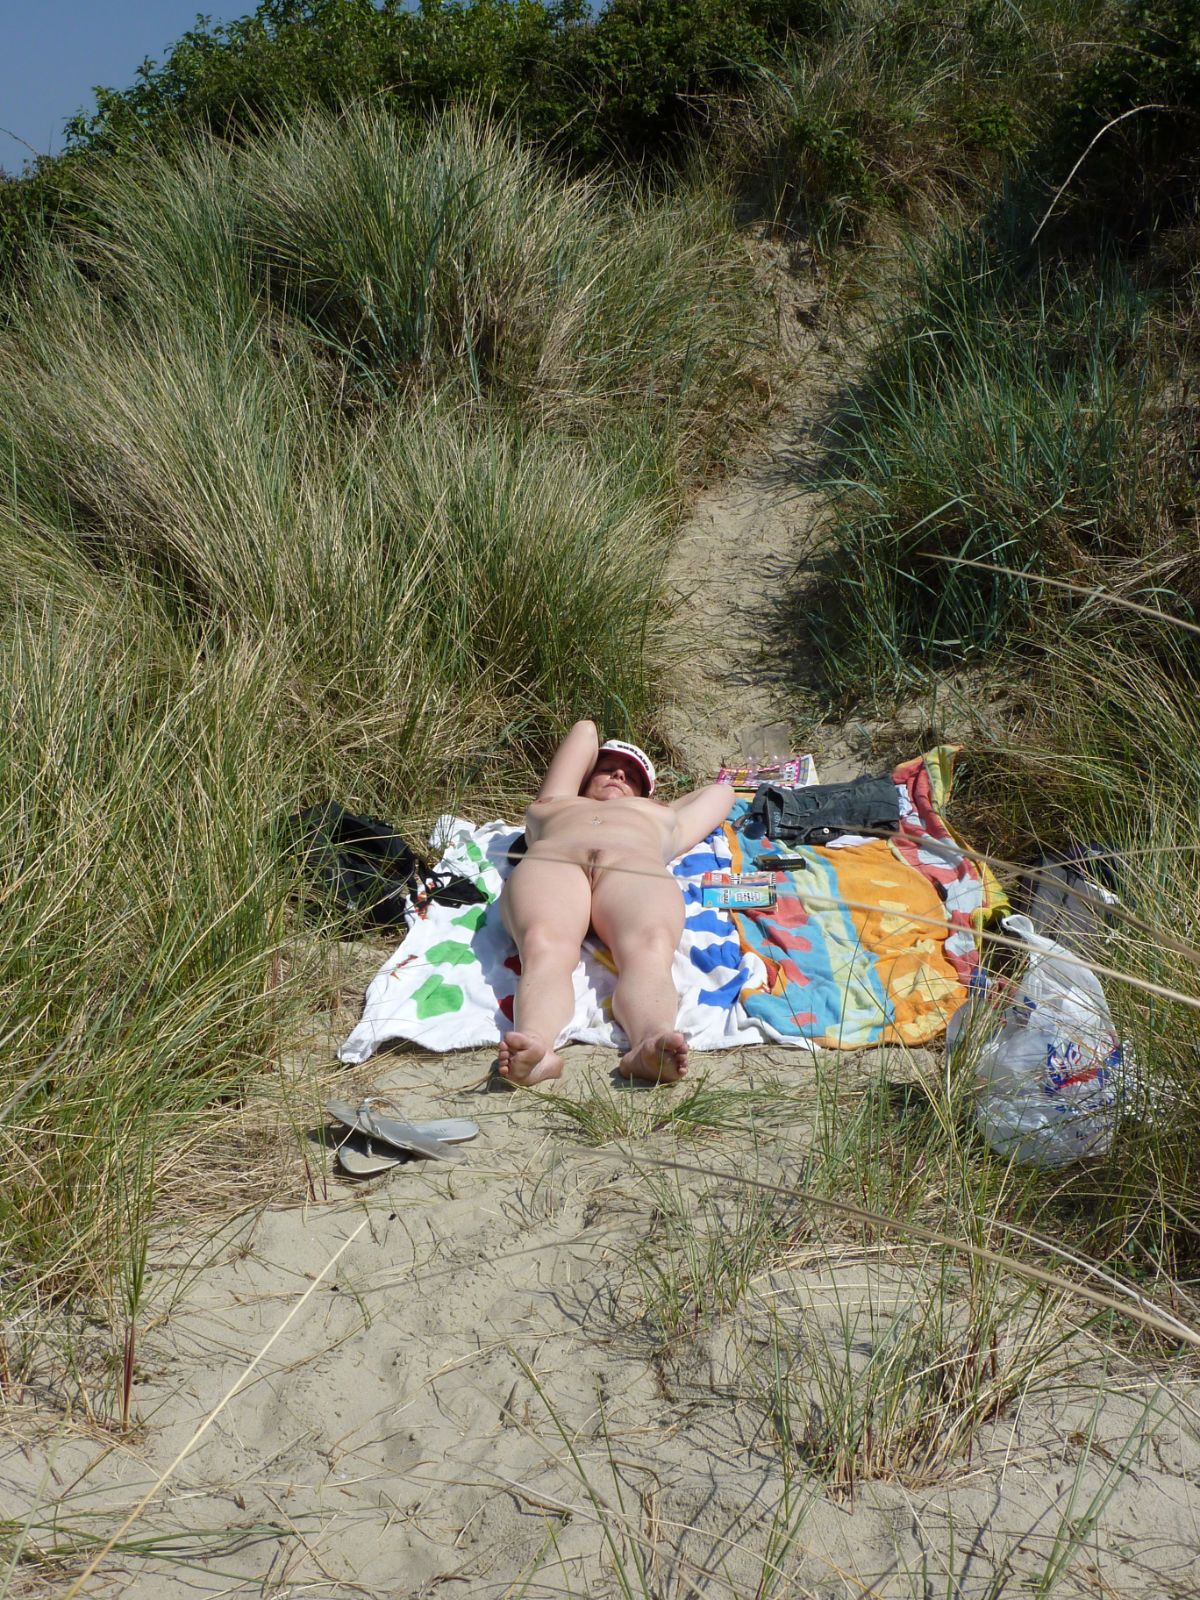 Voyeur Pics Real Amateurs Public Nudity Pics Nude Beach Pics MILF Flashing Pics Hotwife Pics  : Mature slut out flashing on the beach Milf slut naked waiting for stranger to fuck her on the beach